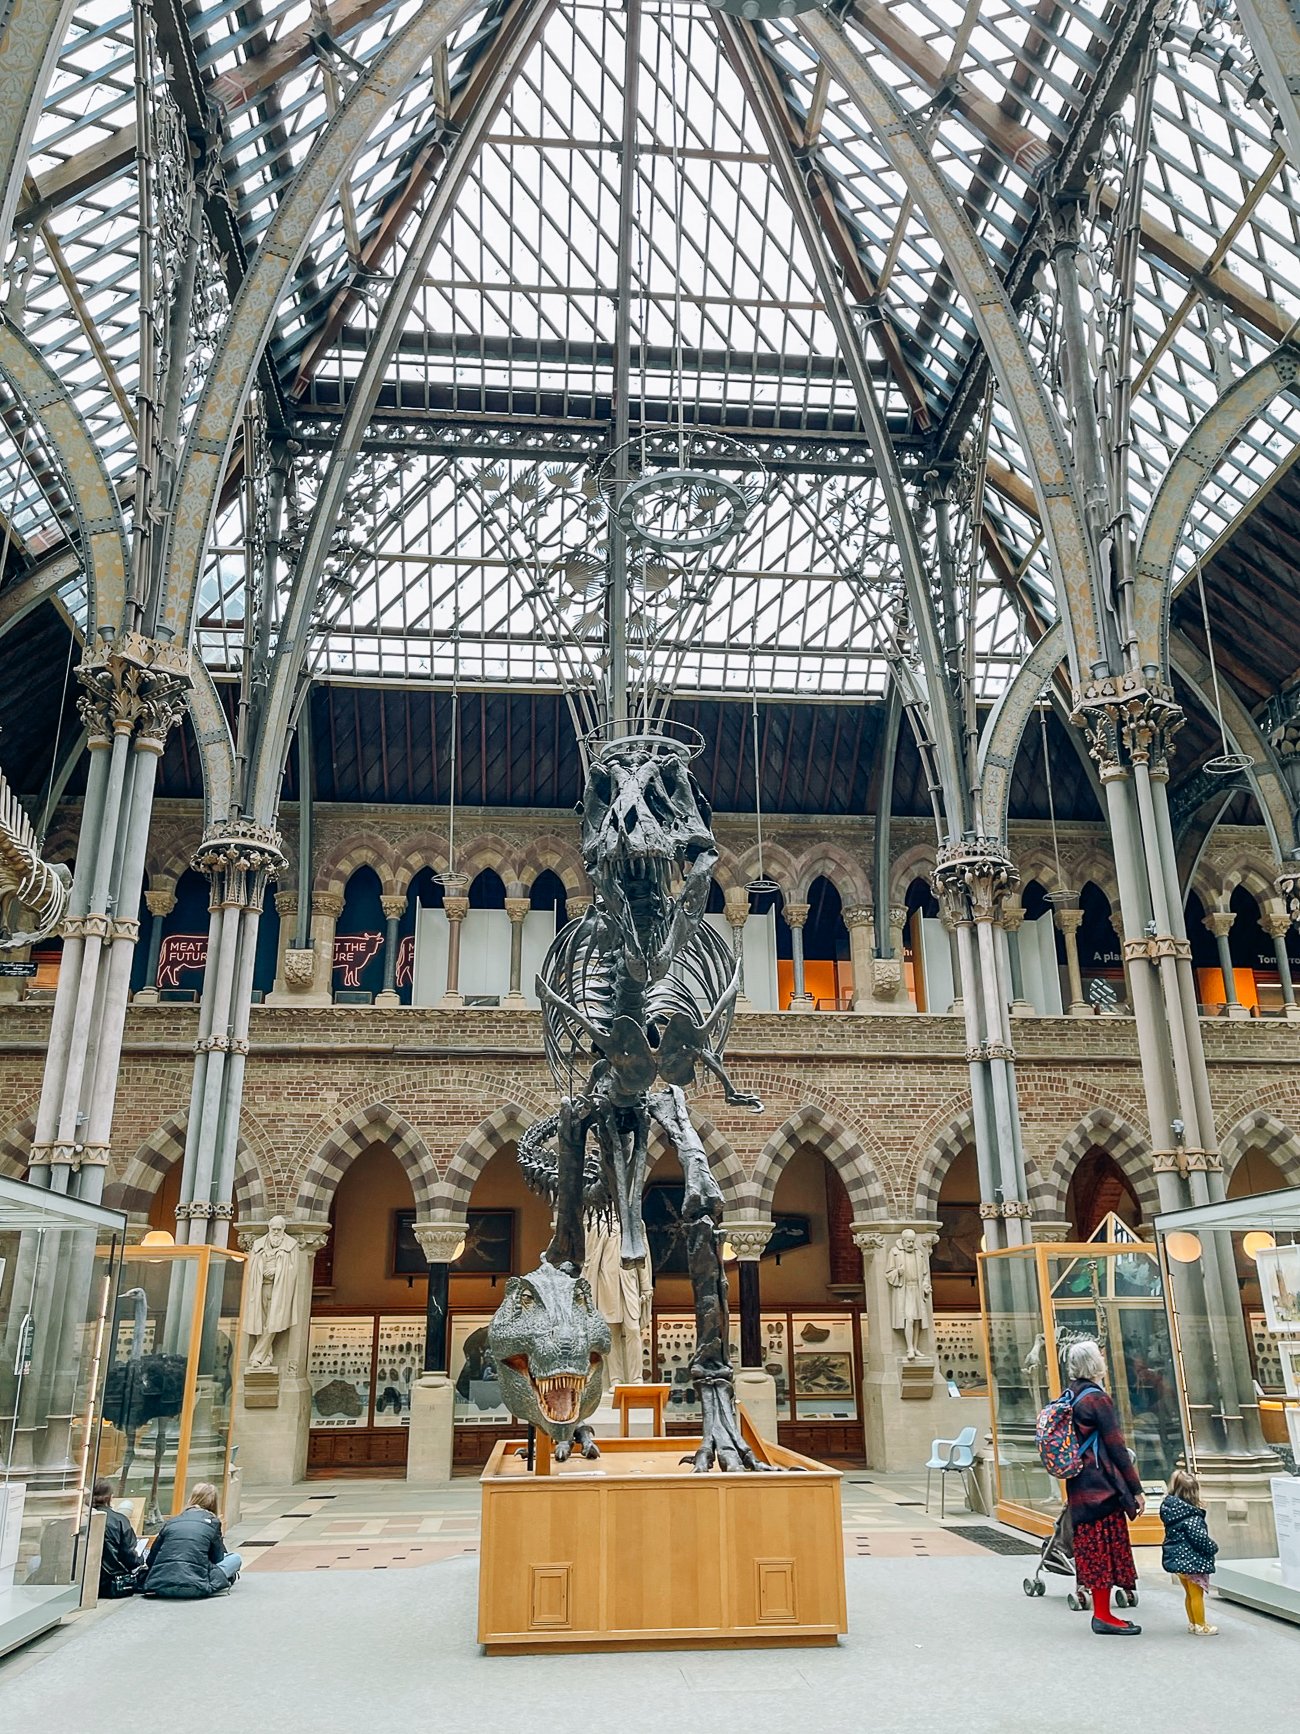 T.Rex skeleton at the Oxford Museum of Natural History